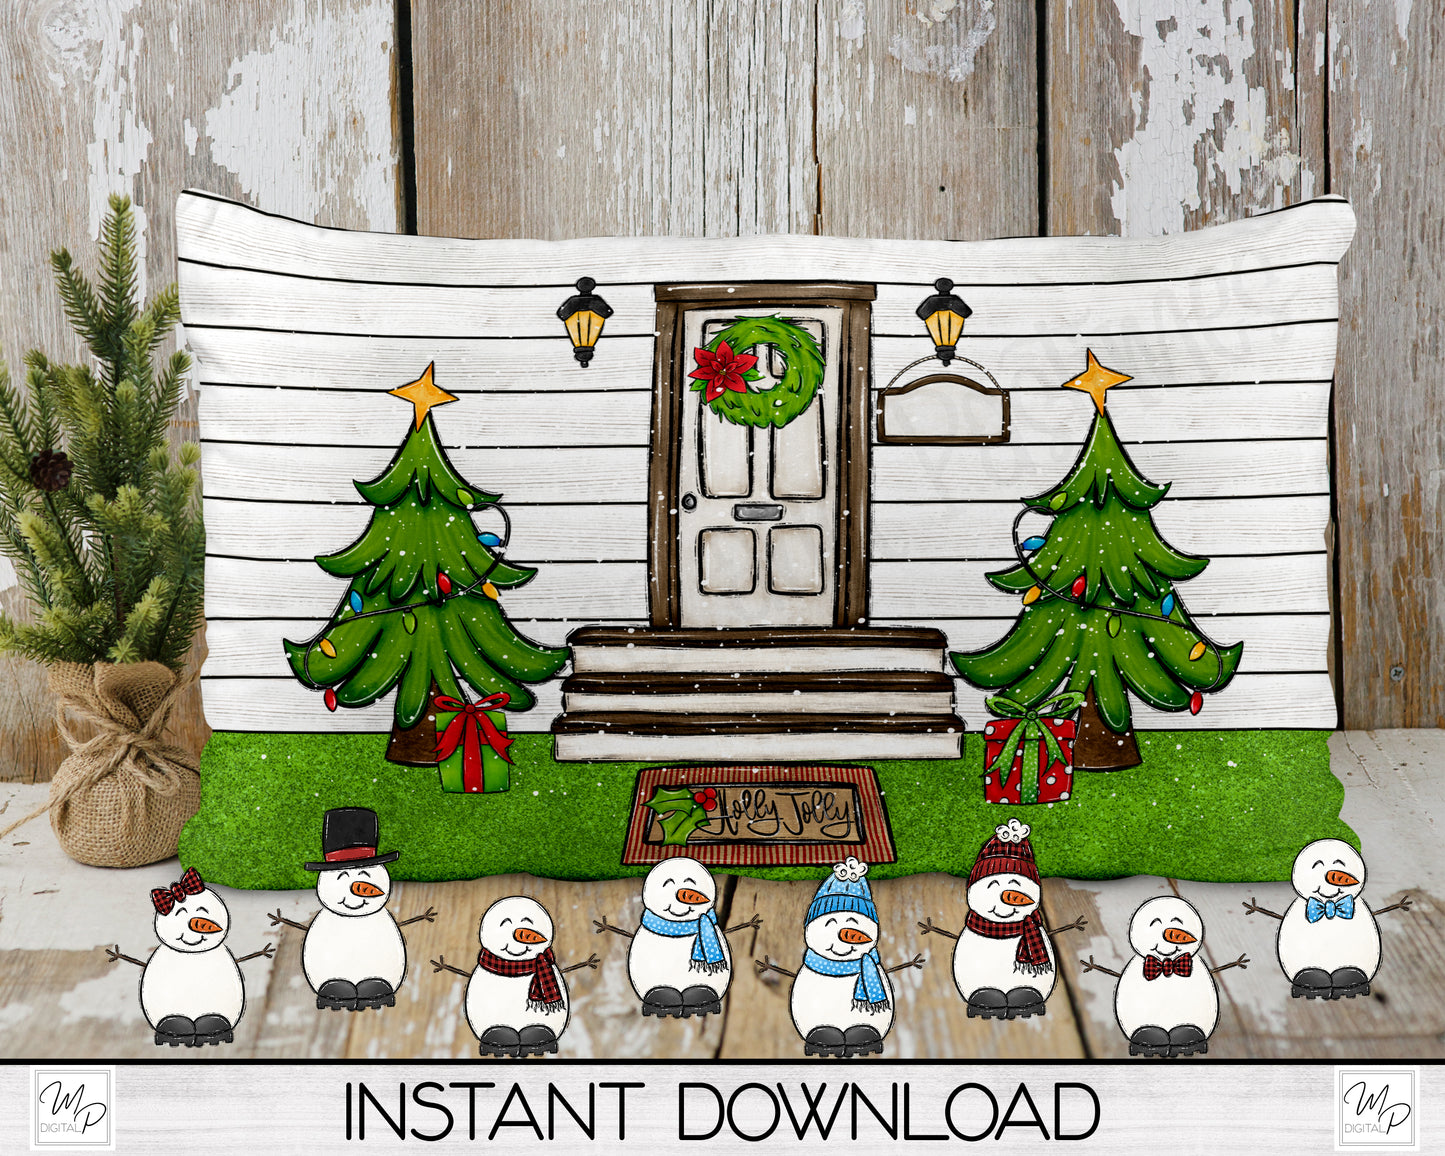 Personalize Snowman Family PNG Sublimation Digital Design Download for Doormat and Lumbar Pillows